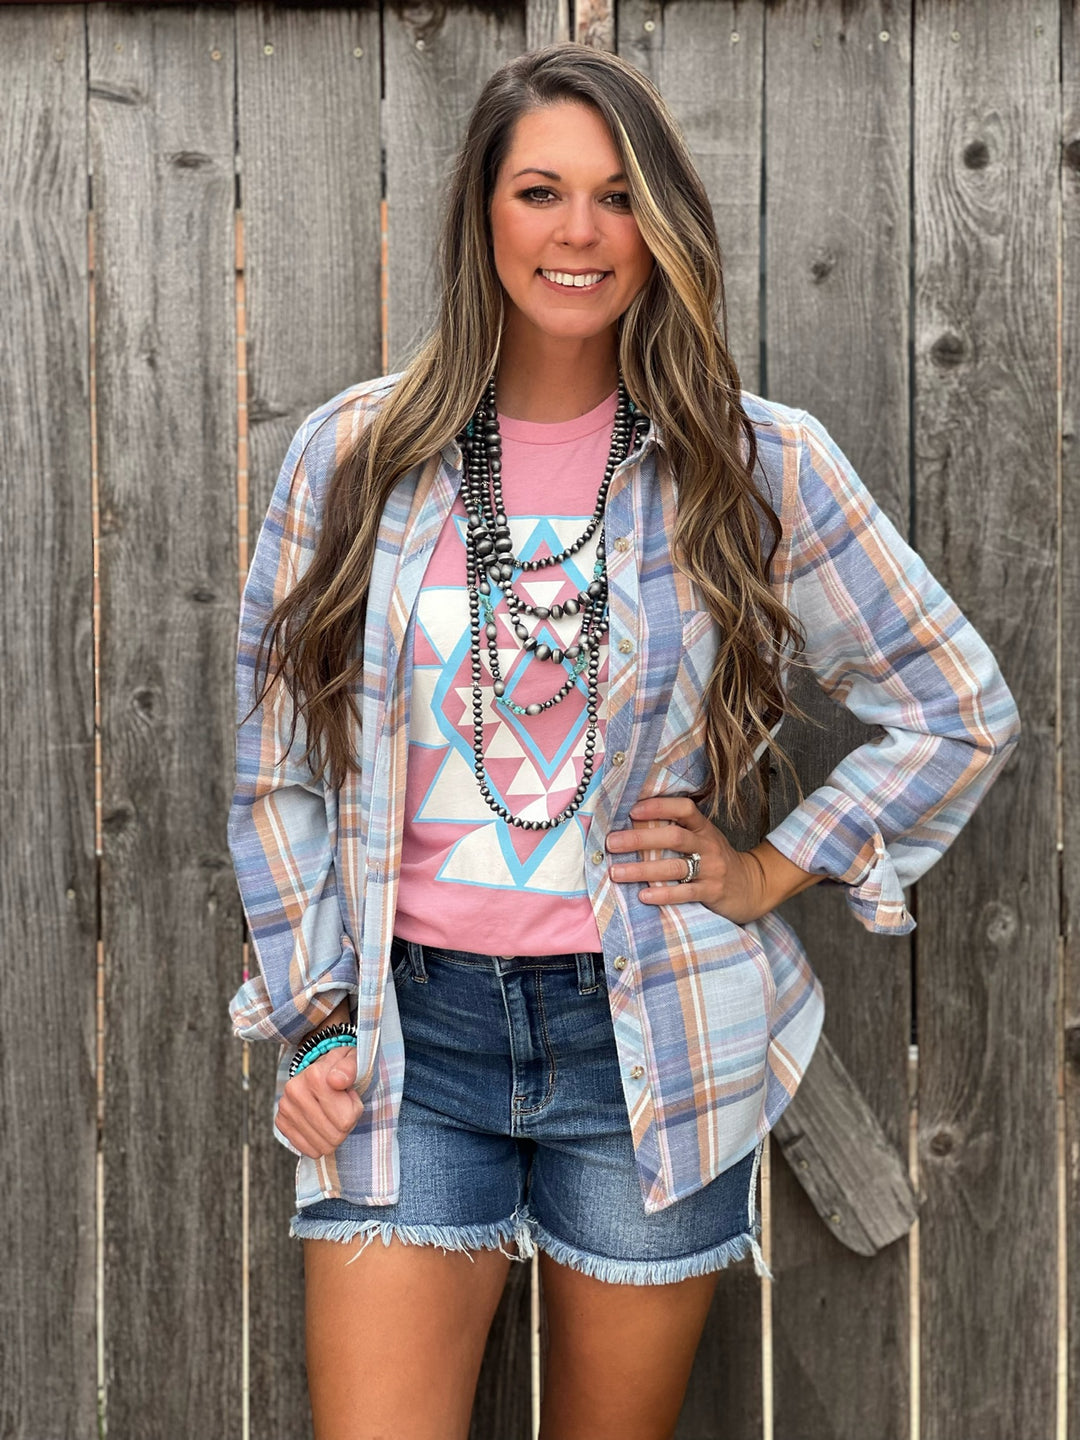 Ginger Pink Aztec Graphic Tee by Texas True Threads